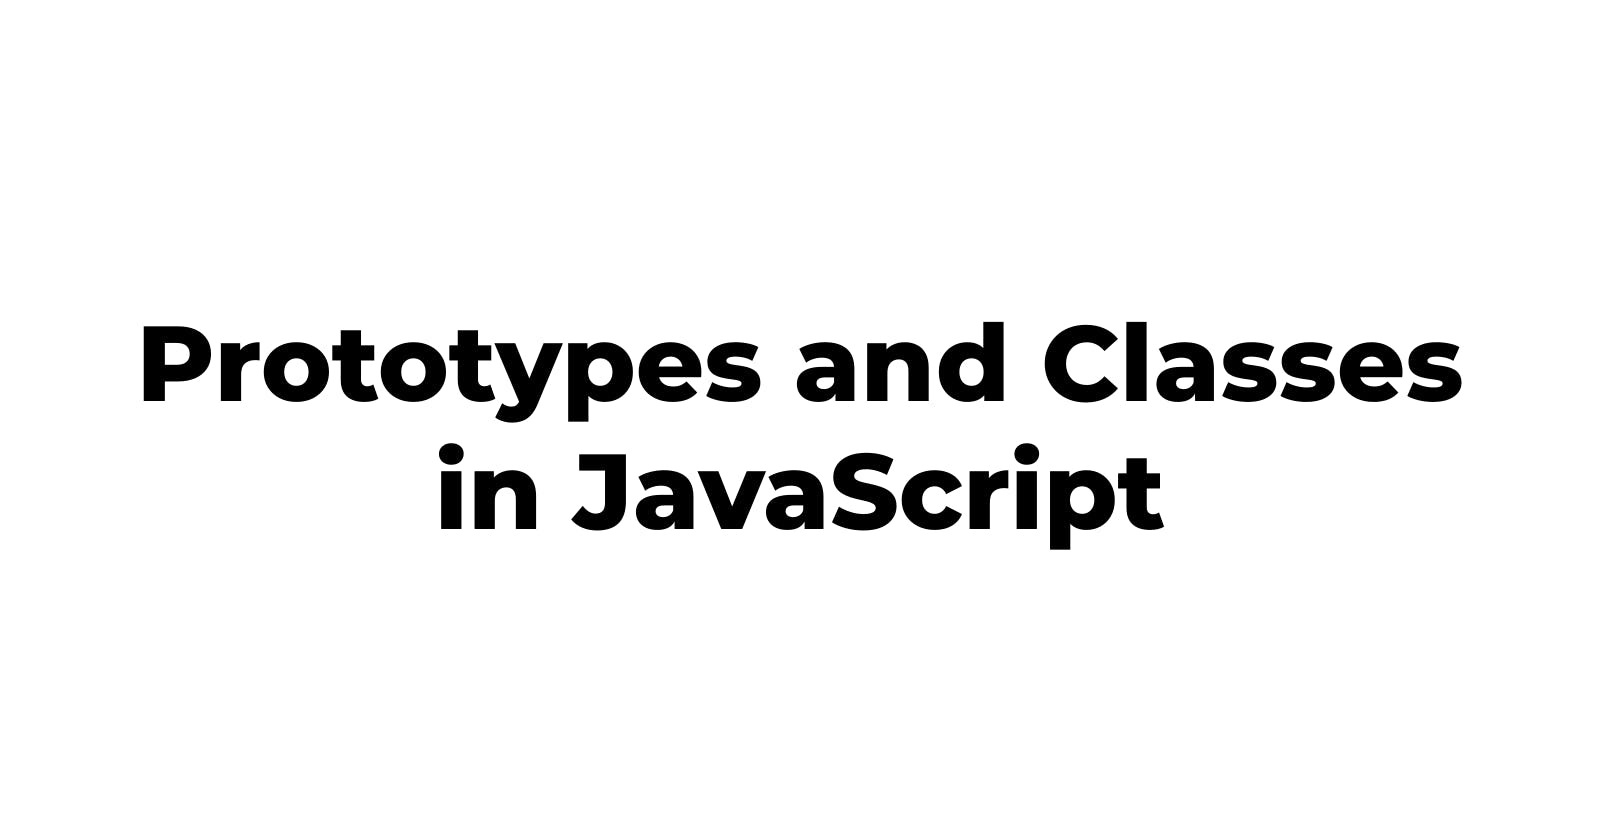 Prototypes and Classes in JavaScript